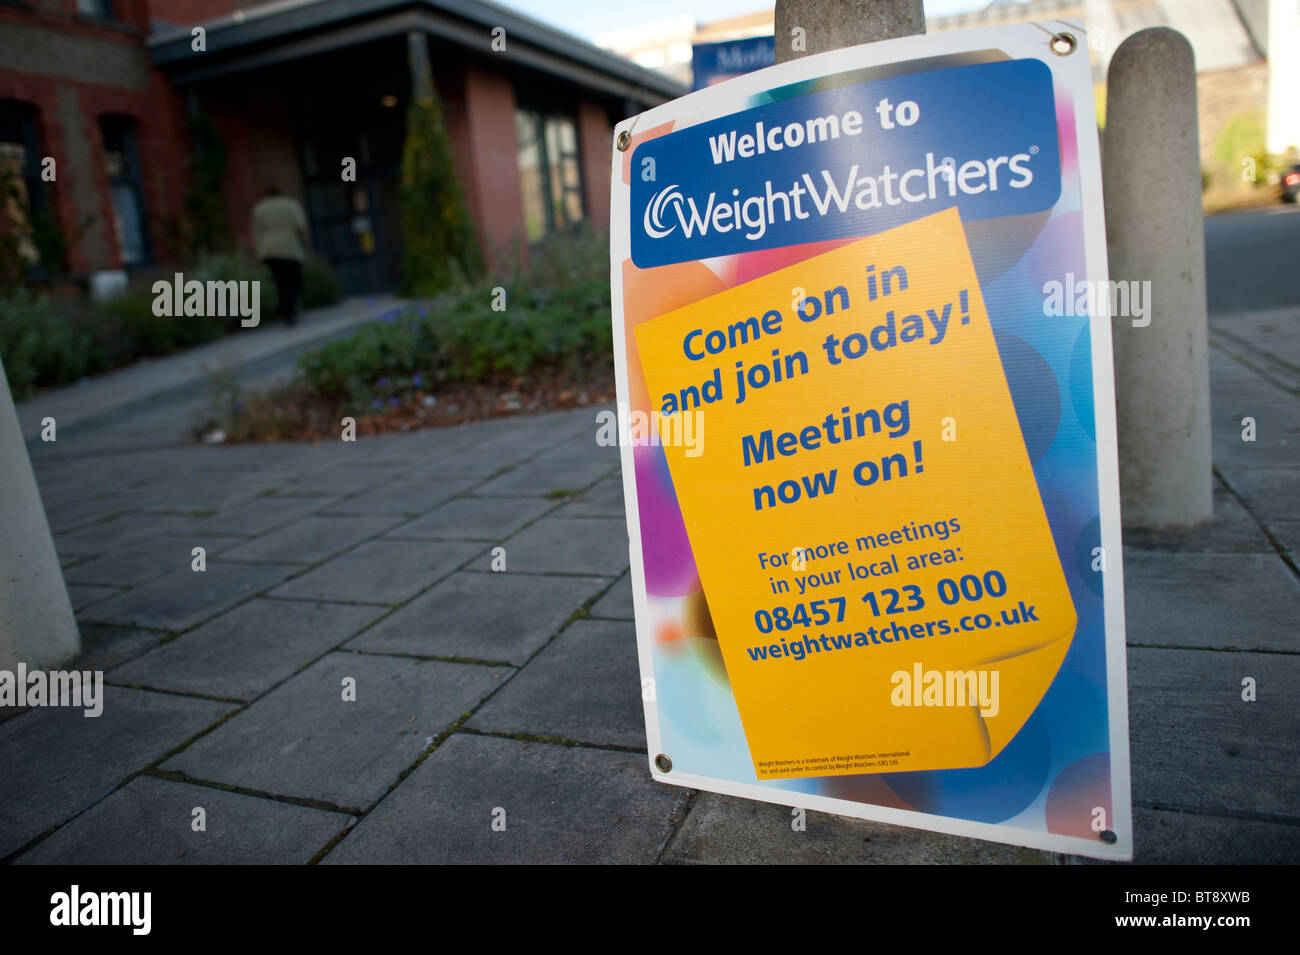 sign announcing a meeting of WeightWatchers in a community hall, UK Stock Photo